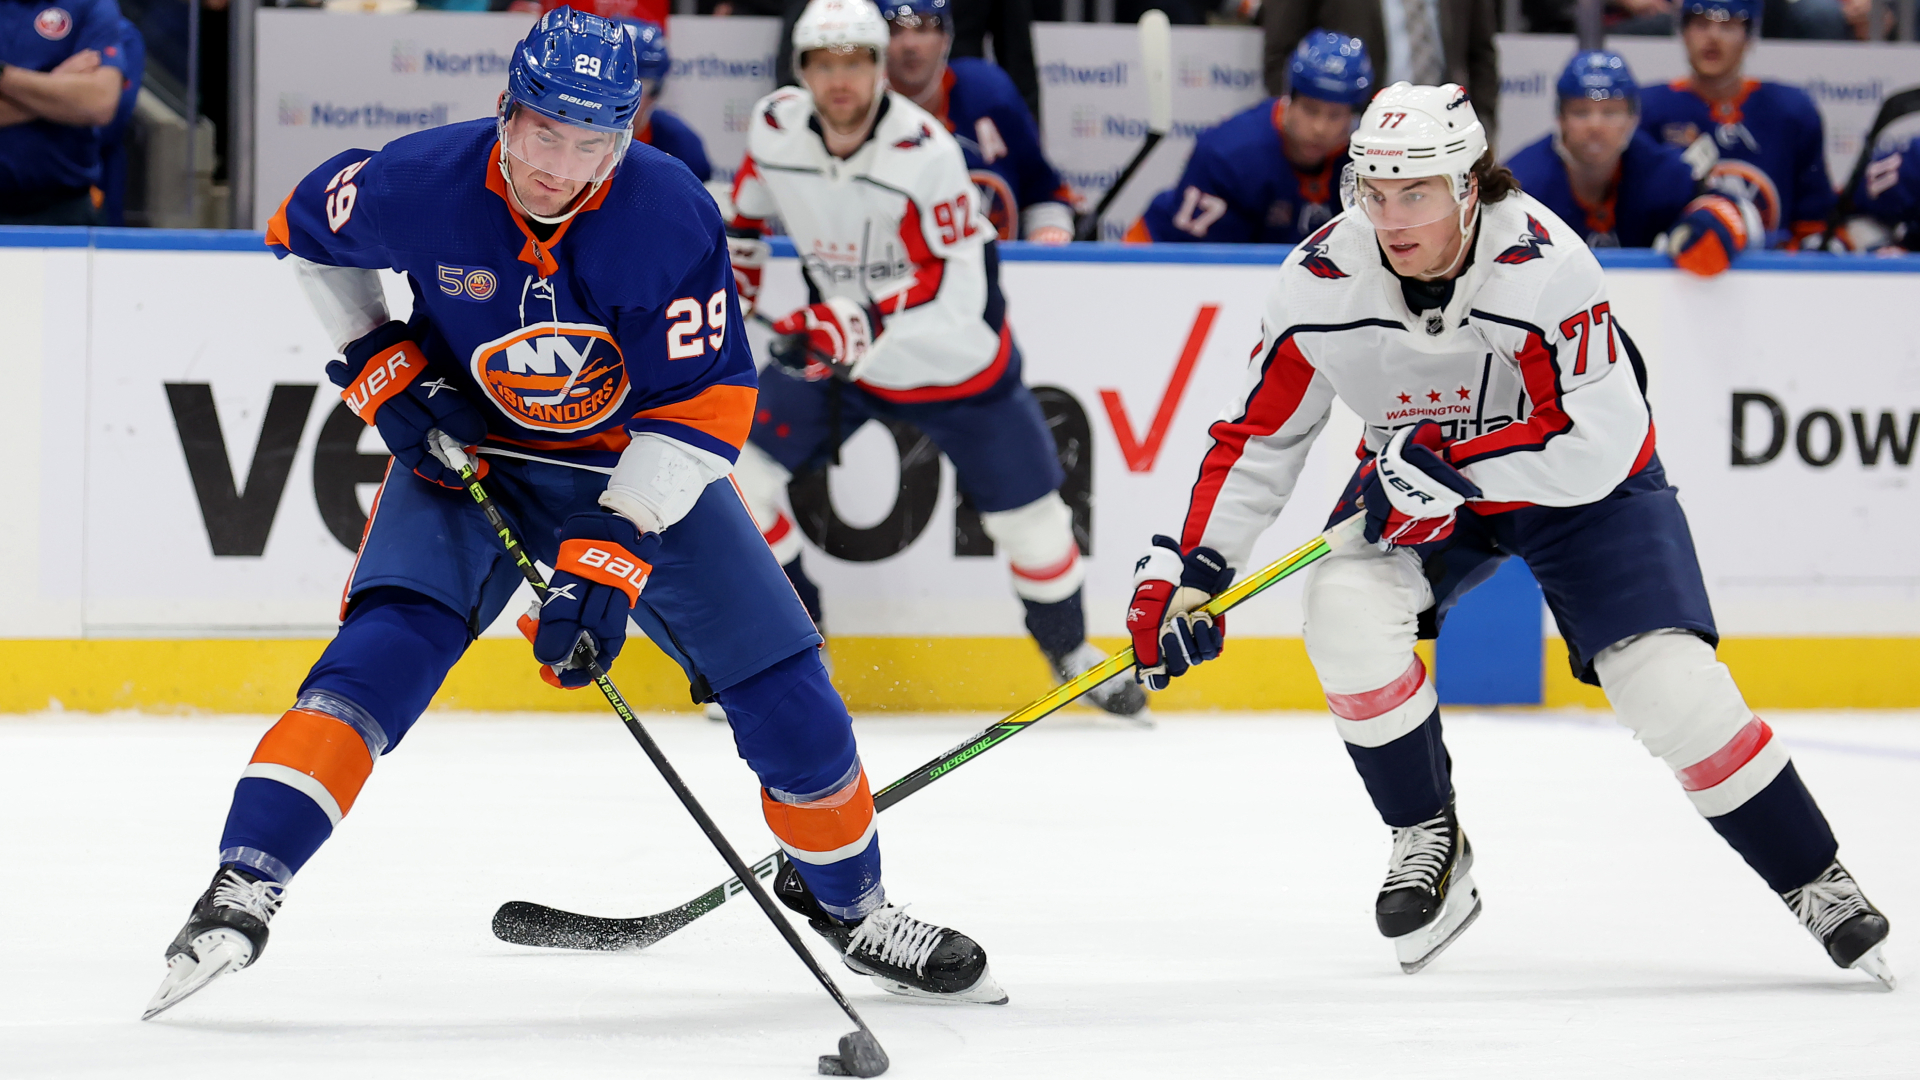 Islanders center Brock Nelson controls the puck against Capitals right wing T.J. Oshie during the second period at UBS Arena